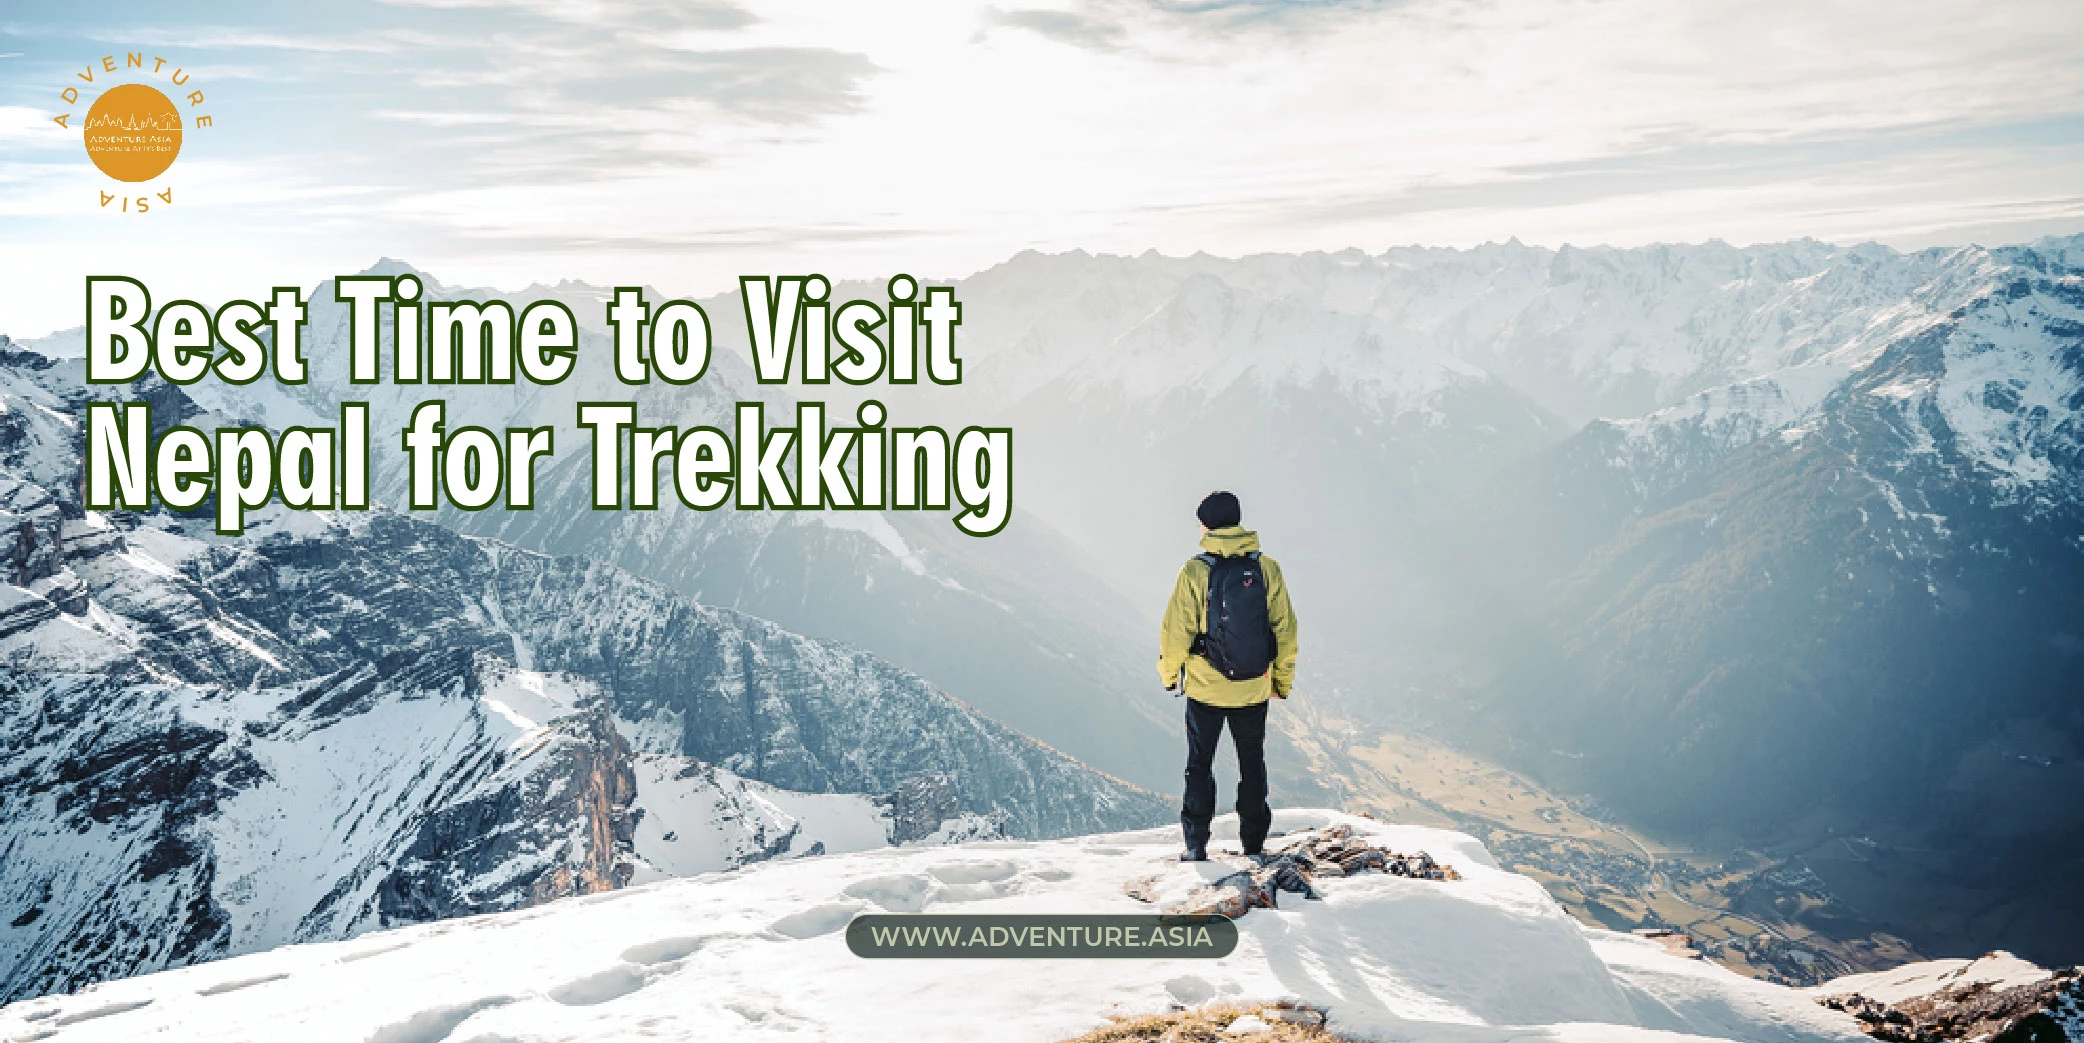 Best Time to Visit Nepal for Trekking: A Season-by-Season Guide for Adventurers